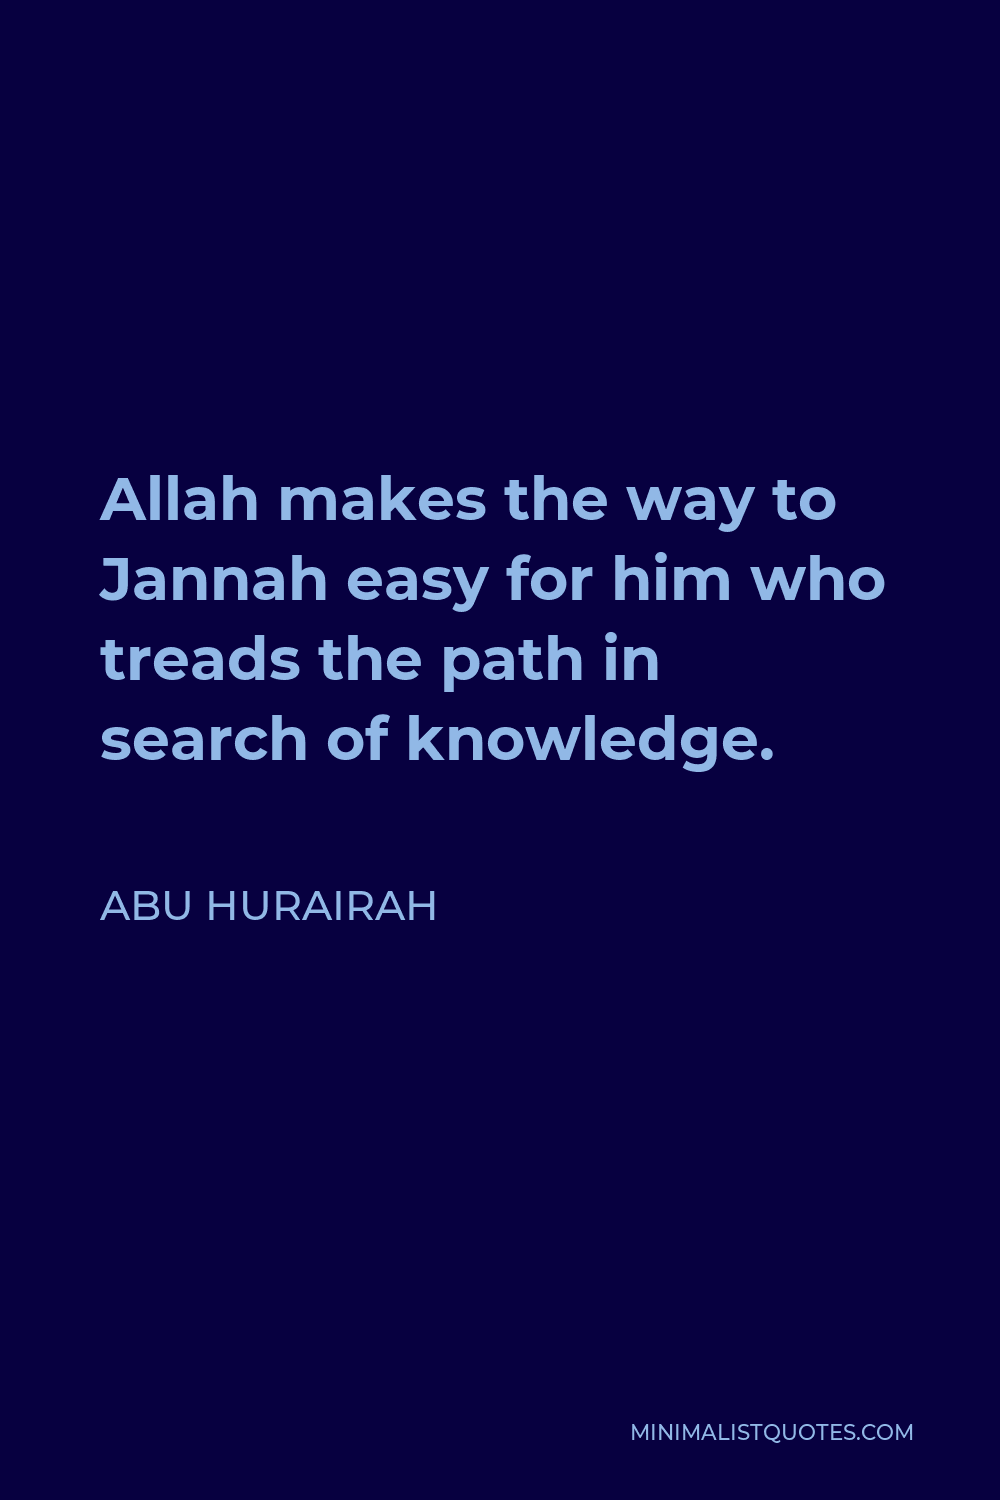 Abu Hurairah Quote - Allah makes the way to Jannah easy for him who treads the path in search of knowledge.